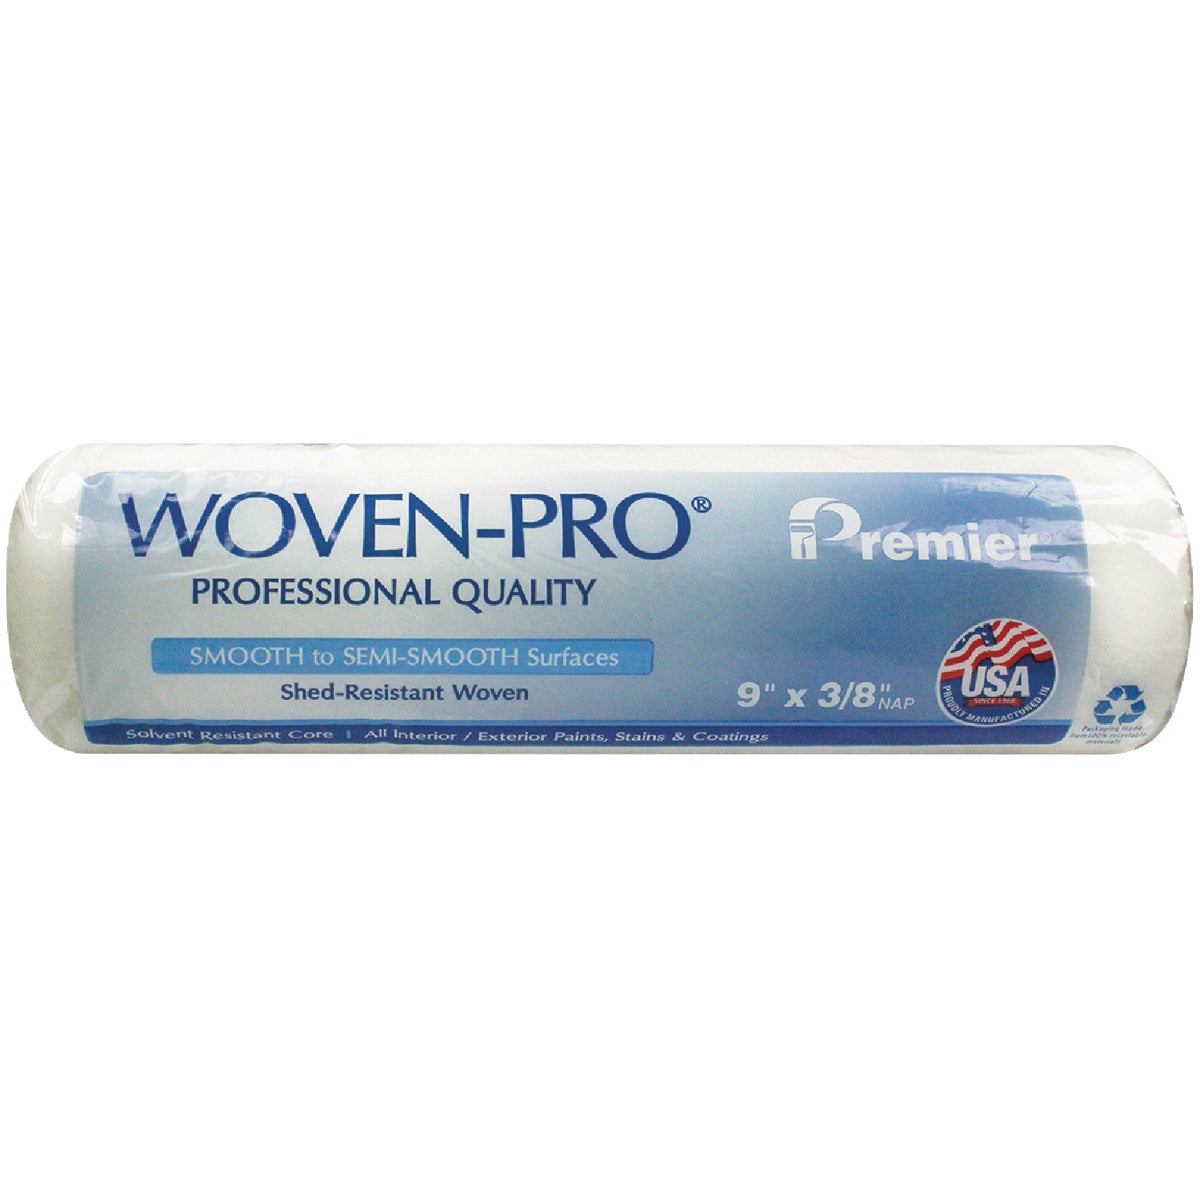 Premier 9 In. X 3/8 In. Woven-Pro Roller Cover